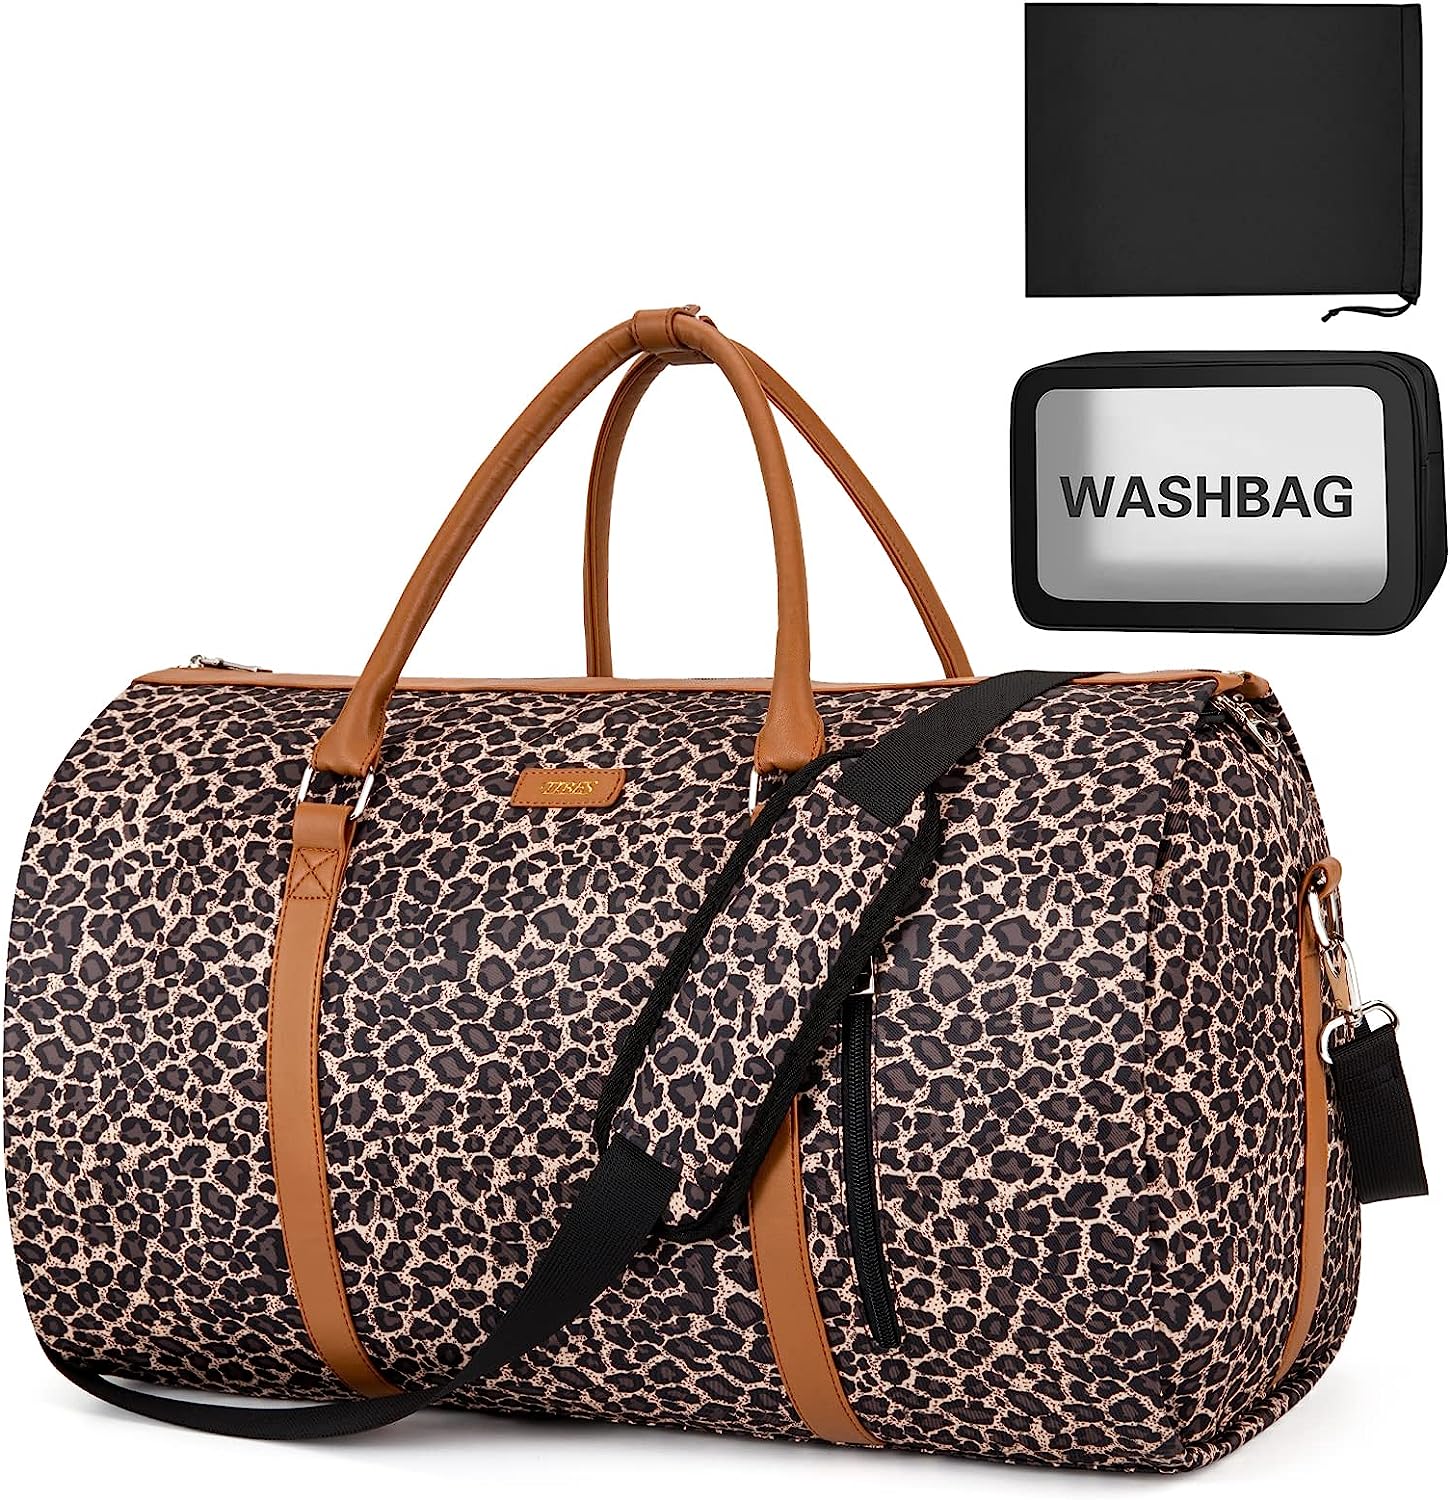 Garment Bag For Travel Convertible Carry On Garment Bag Large Travel Duffel Bags For Women 2 In 1 Hanging Suitcase Suit Travel Bags For Women & Men 3pcs Set, C Brown Leopard